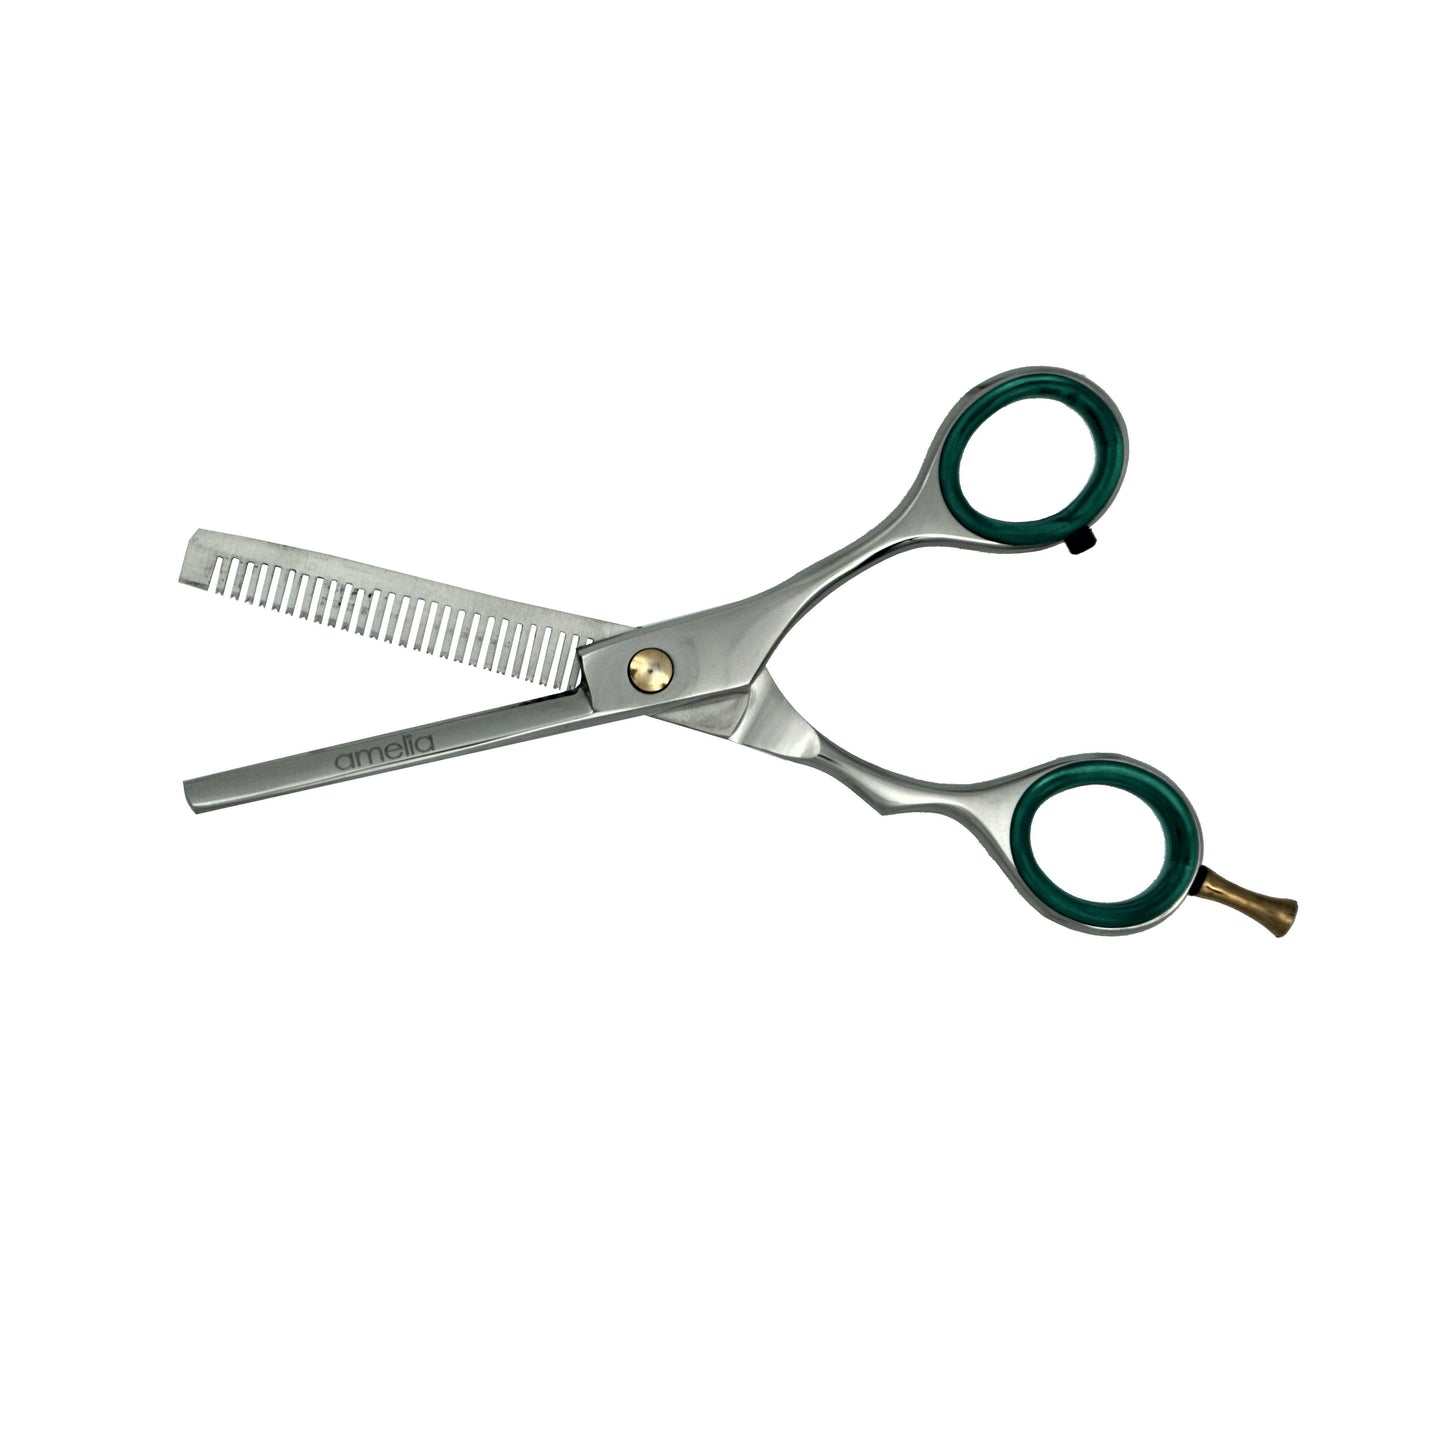 5.5" Right Handed, Stainless Steel Thinning Shear, Removable Finger Rest